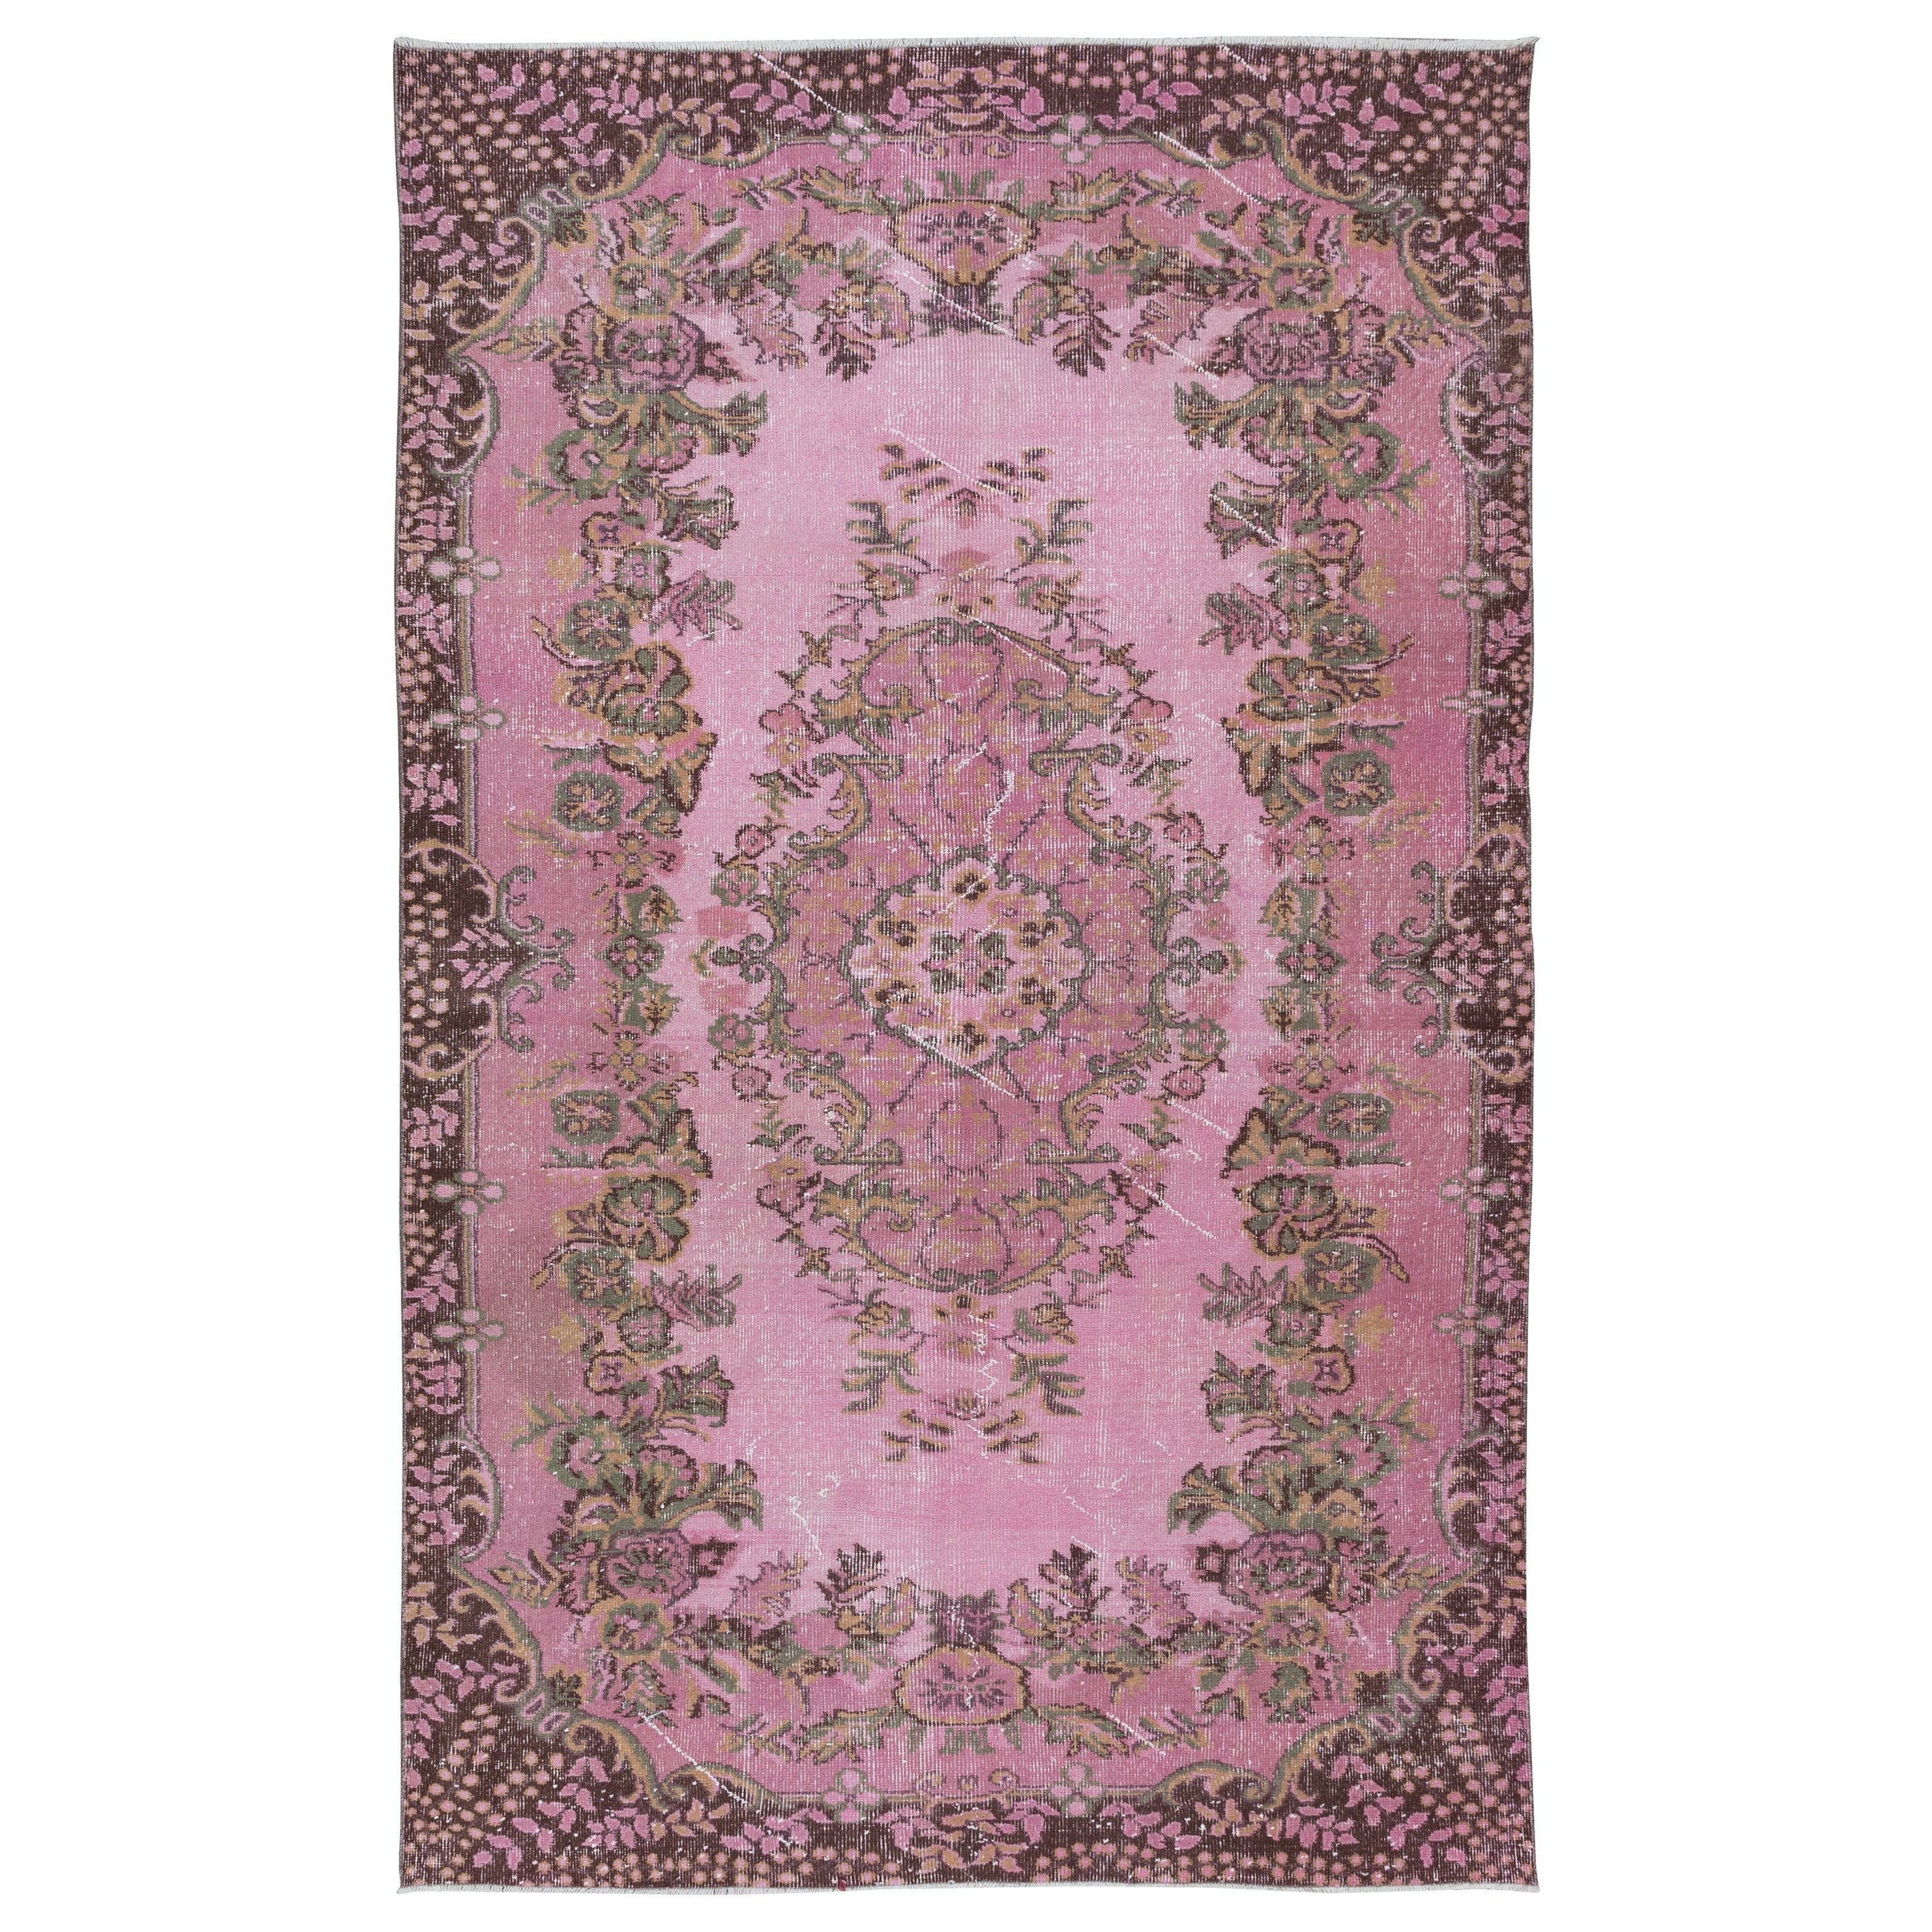 6x10 Ft Rose Pink Handmade Wool Area Rug from Turkey, Great 4 Modern Interiors For Sale